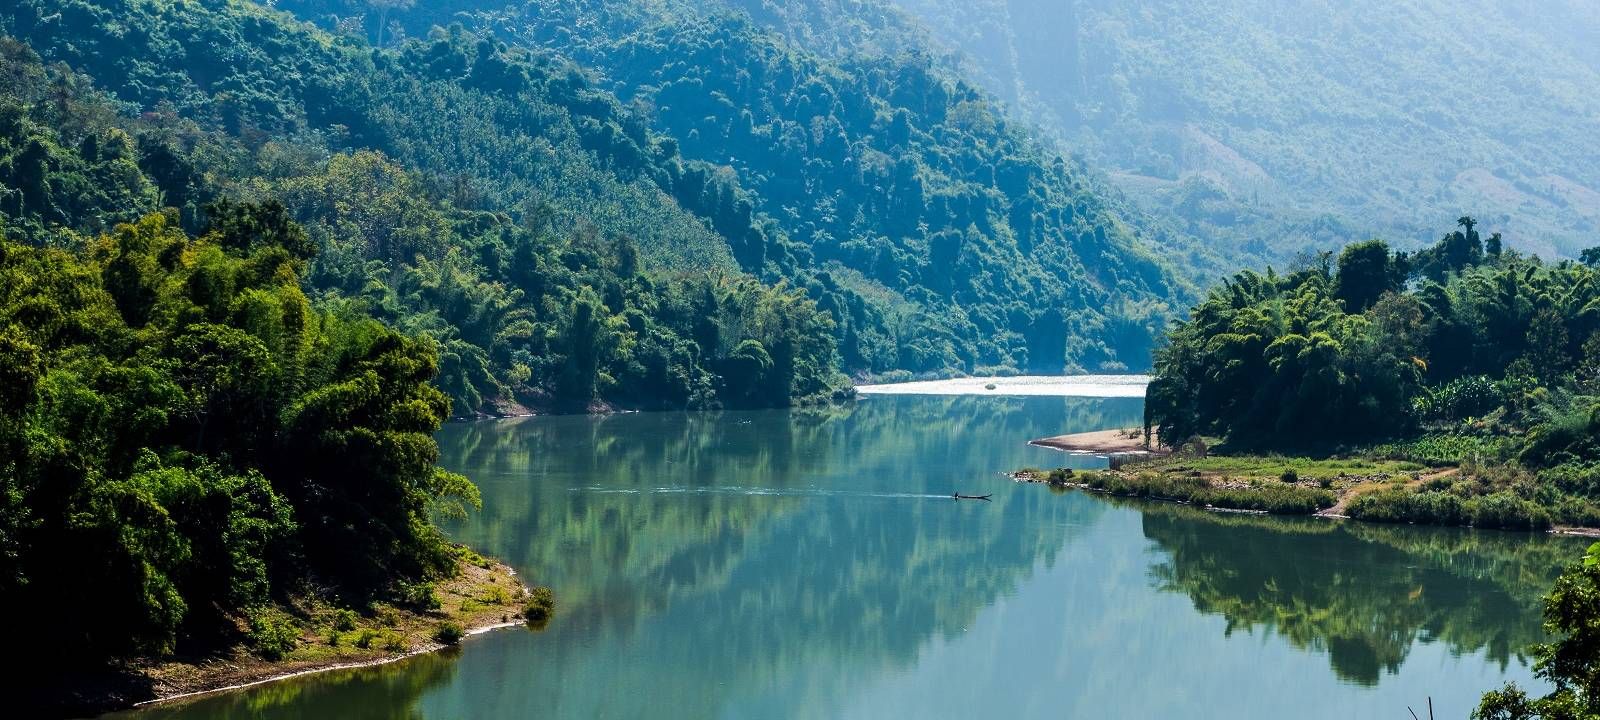 Vietnam is rich in natural beauty